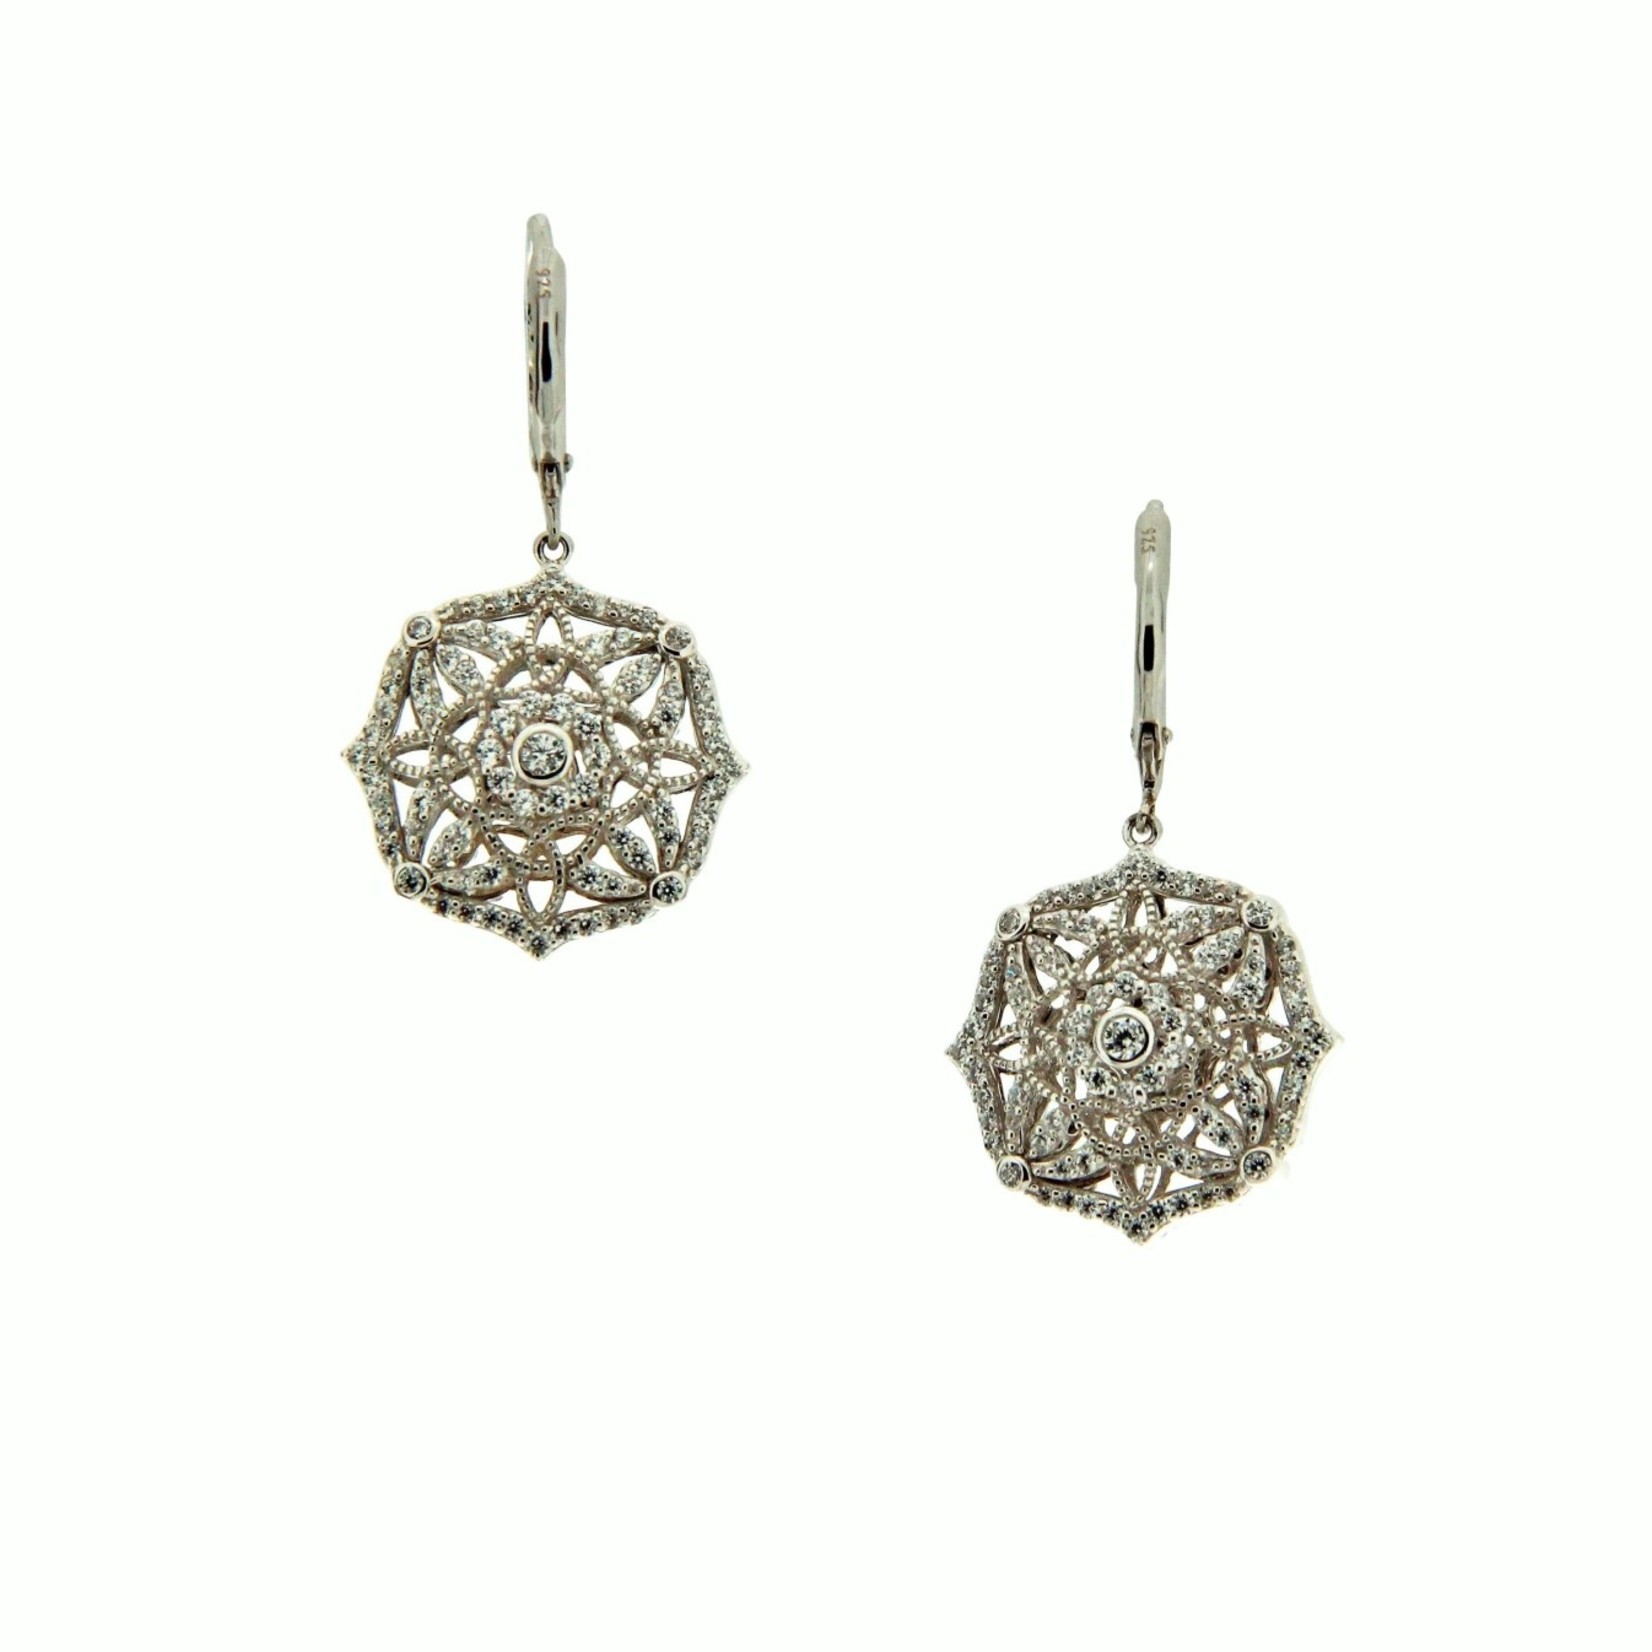 Keith Jack Night & Day Scalloped Earrings